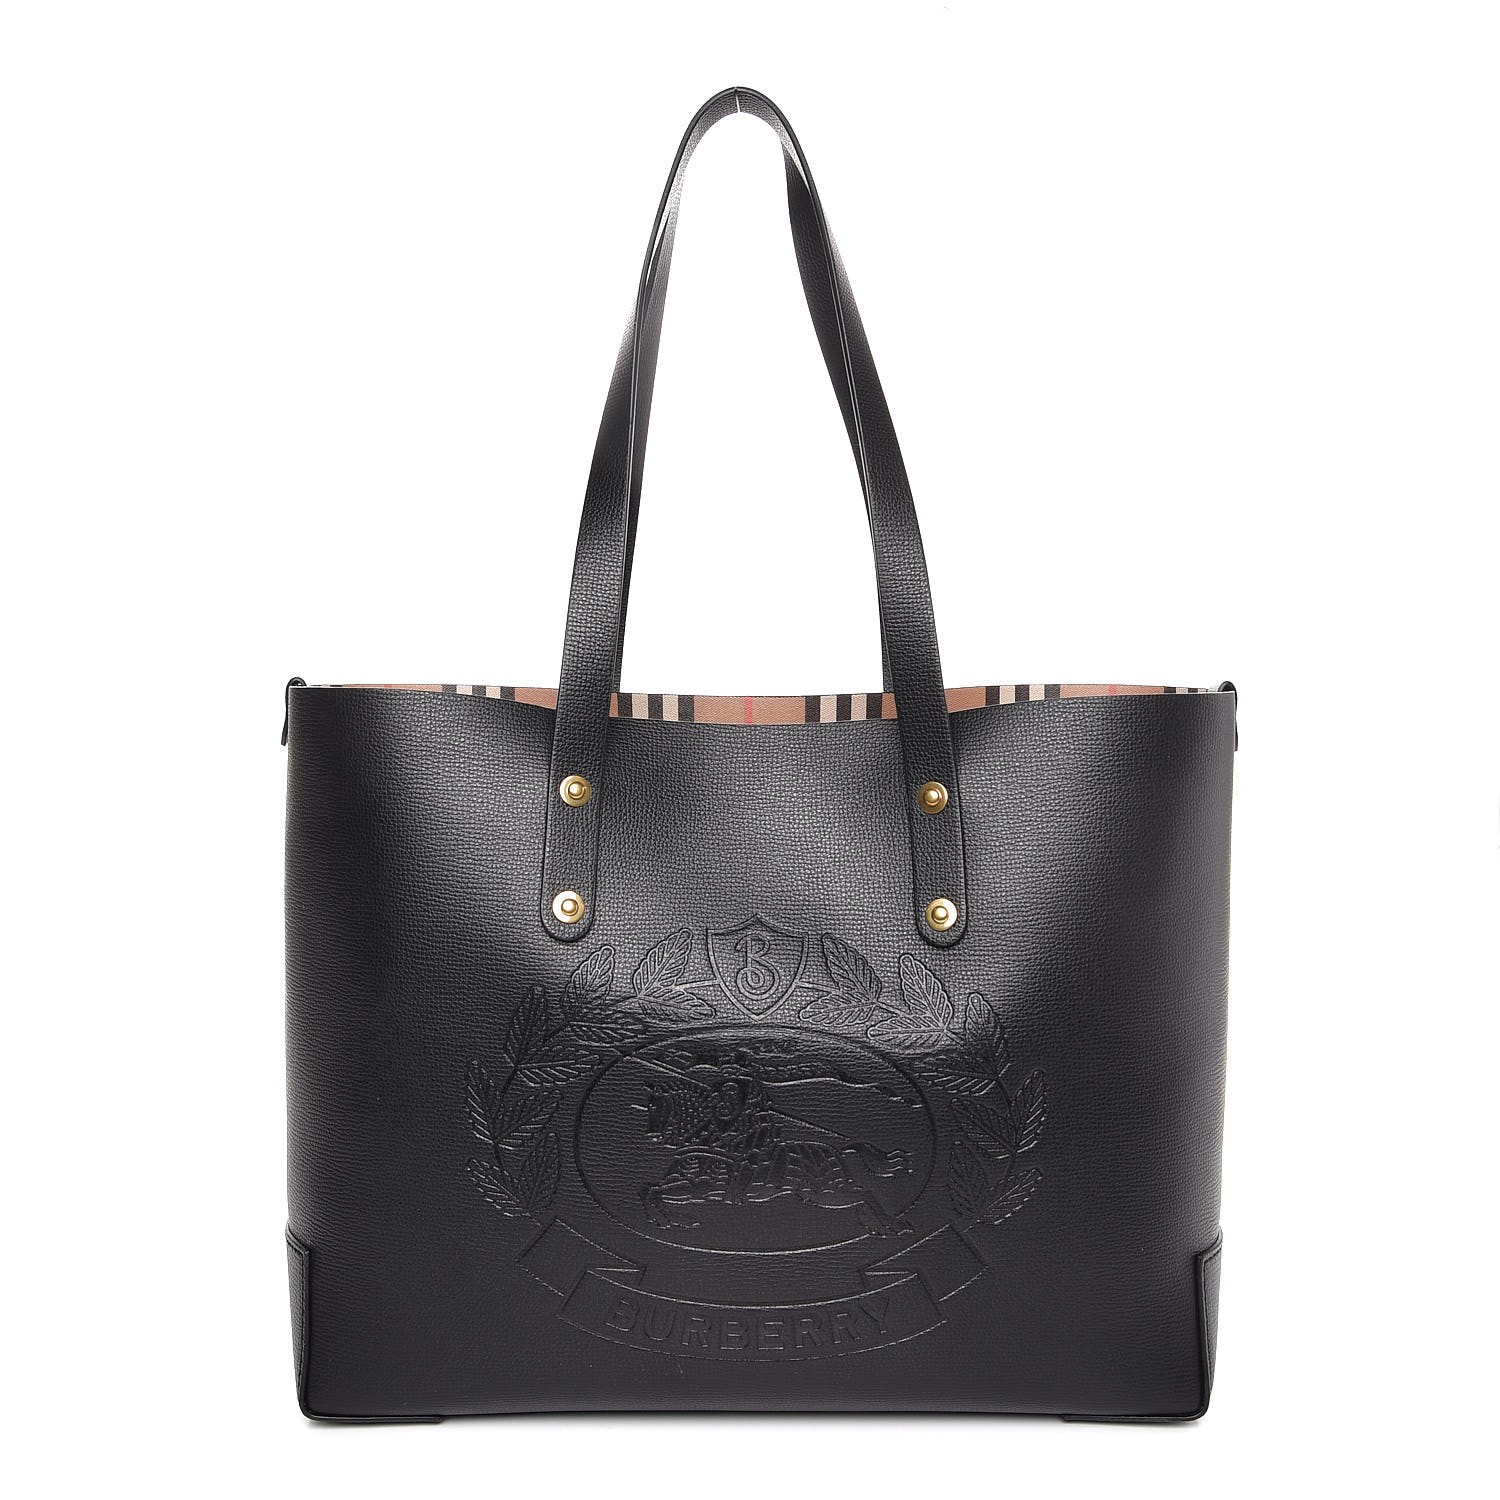 BURBERRY Calfskin Embossed Crest Small Tote Black 318361